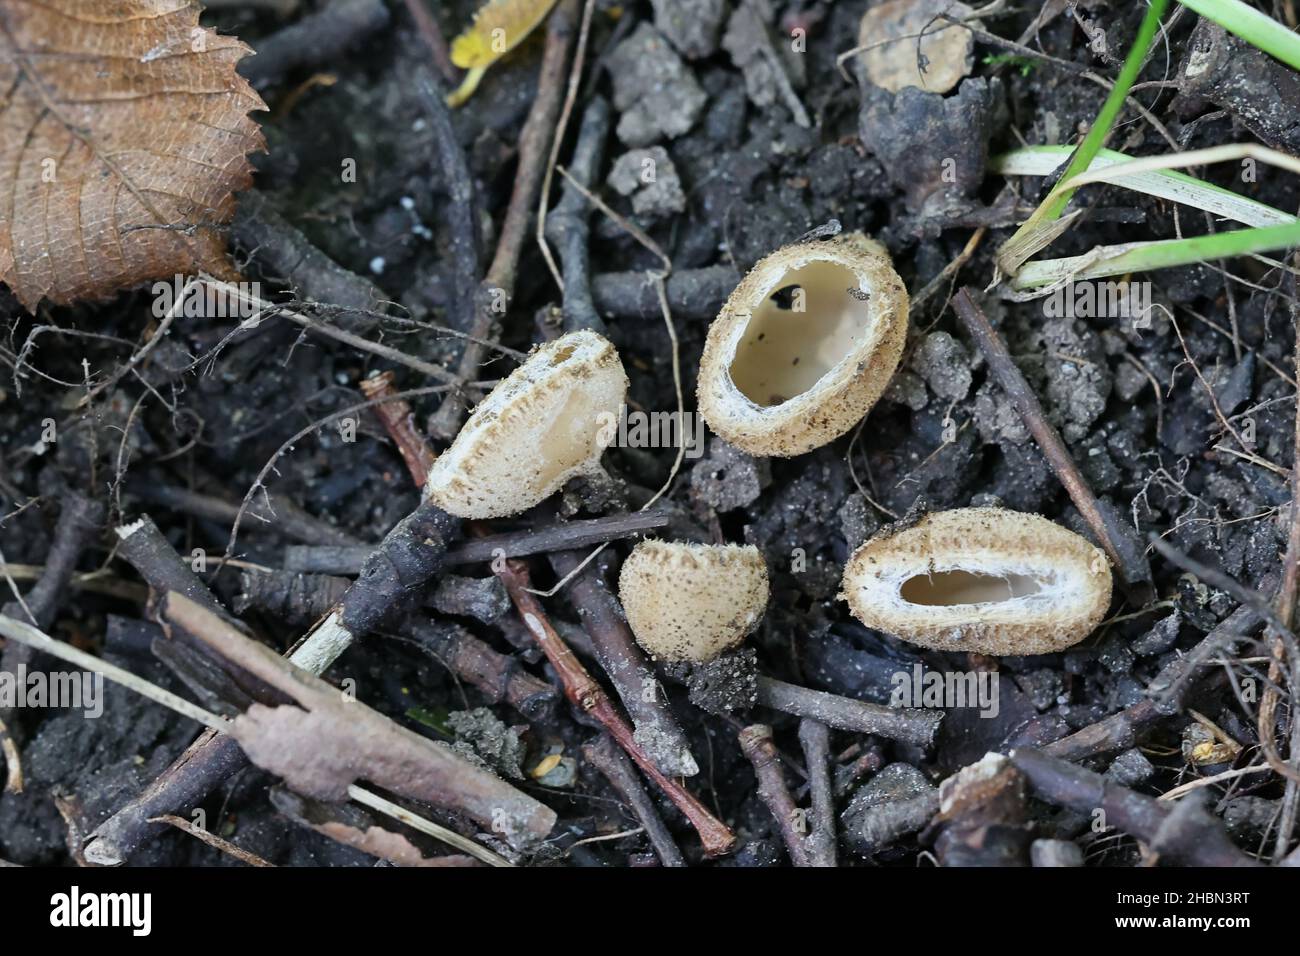 Tarzetta cupularis, commonly known as Toothed Cup, wild fungus from Finland Stock Photo